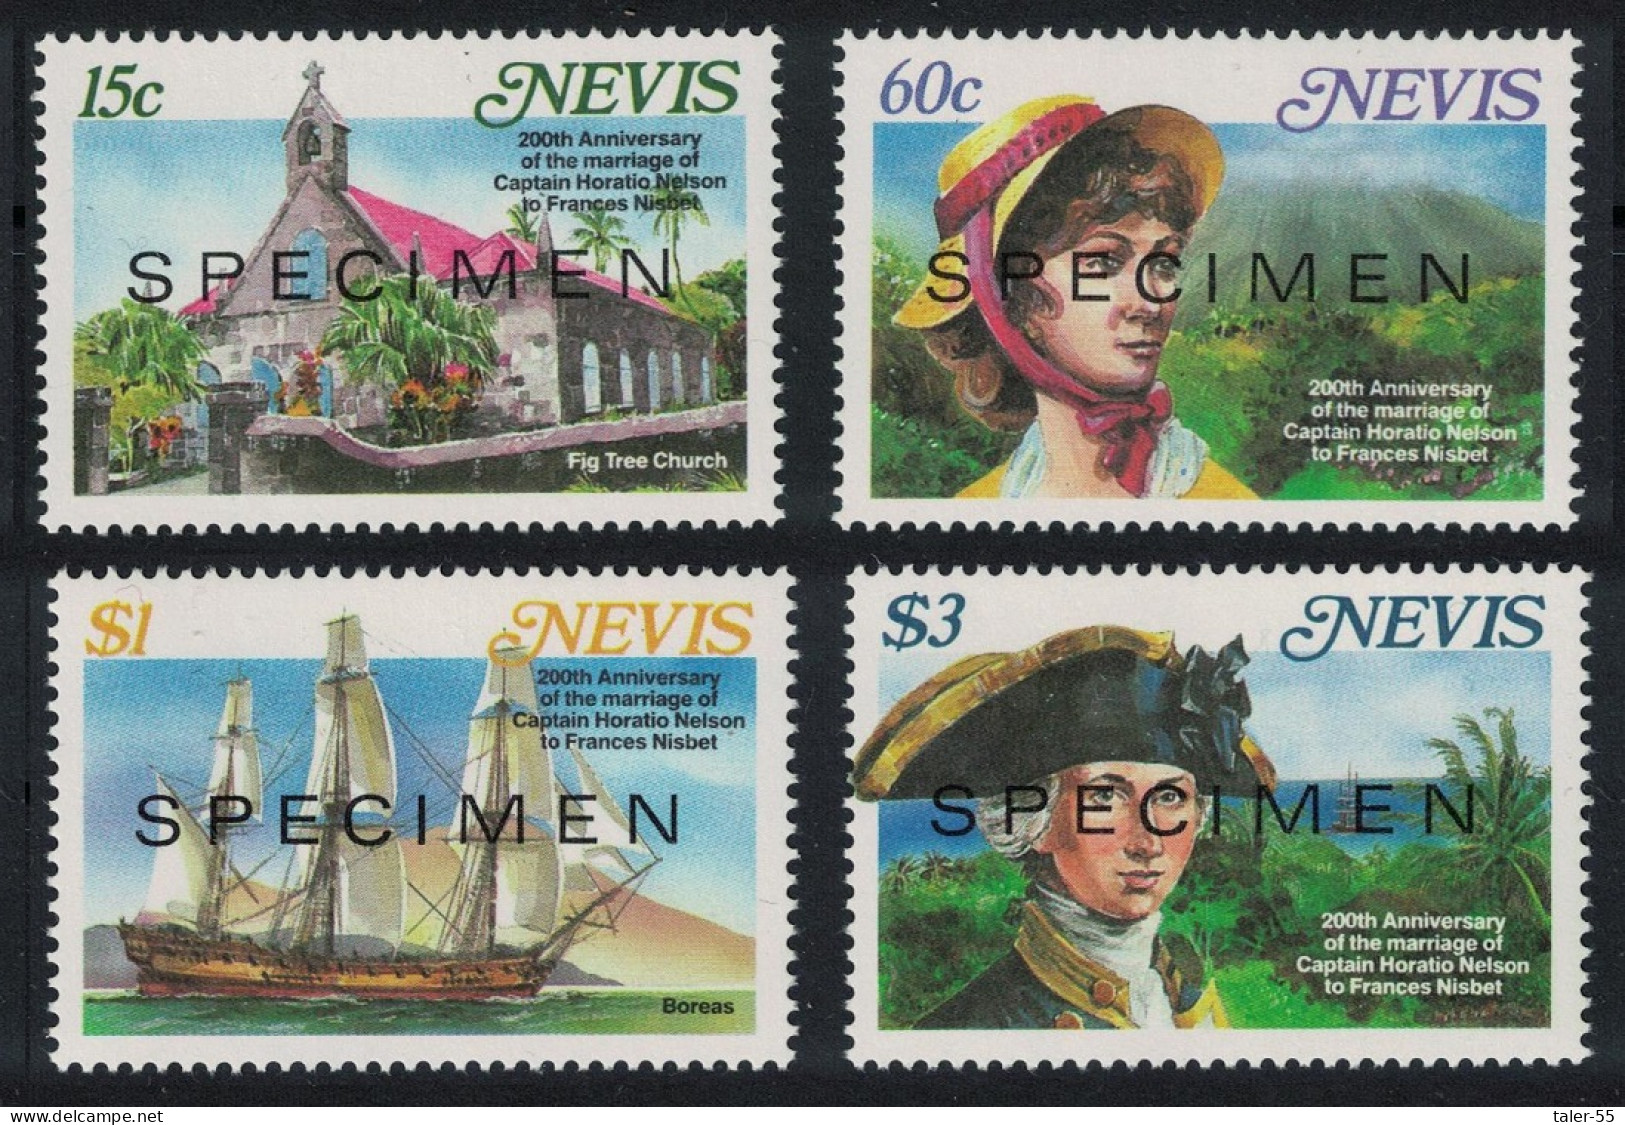 Nevis Marriage Of Horatio Nelson And Frances Nisbet 4v SPECIMEN 1987 MNH SG#472-475 - St.Kitts And Nevis ( 1983-...)